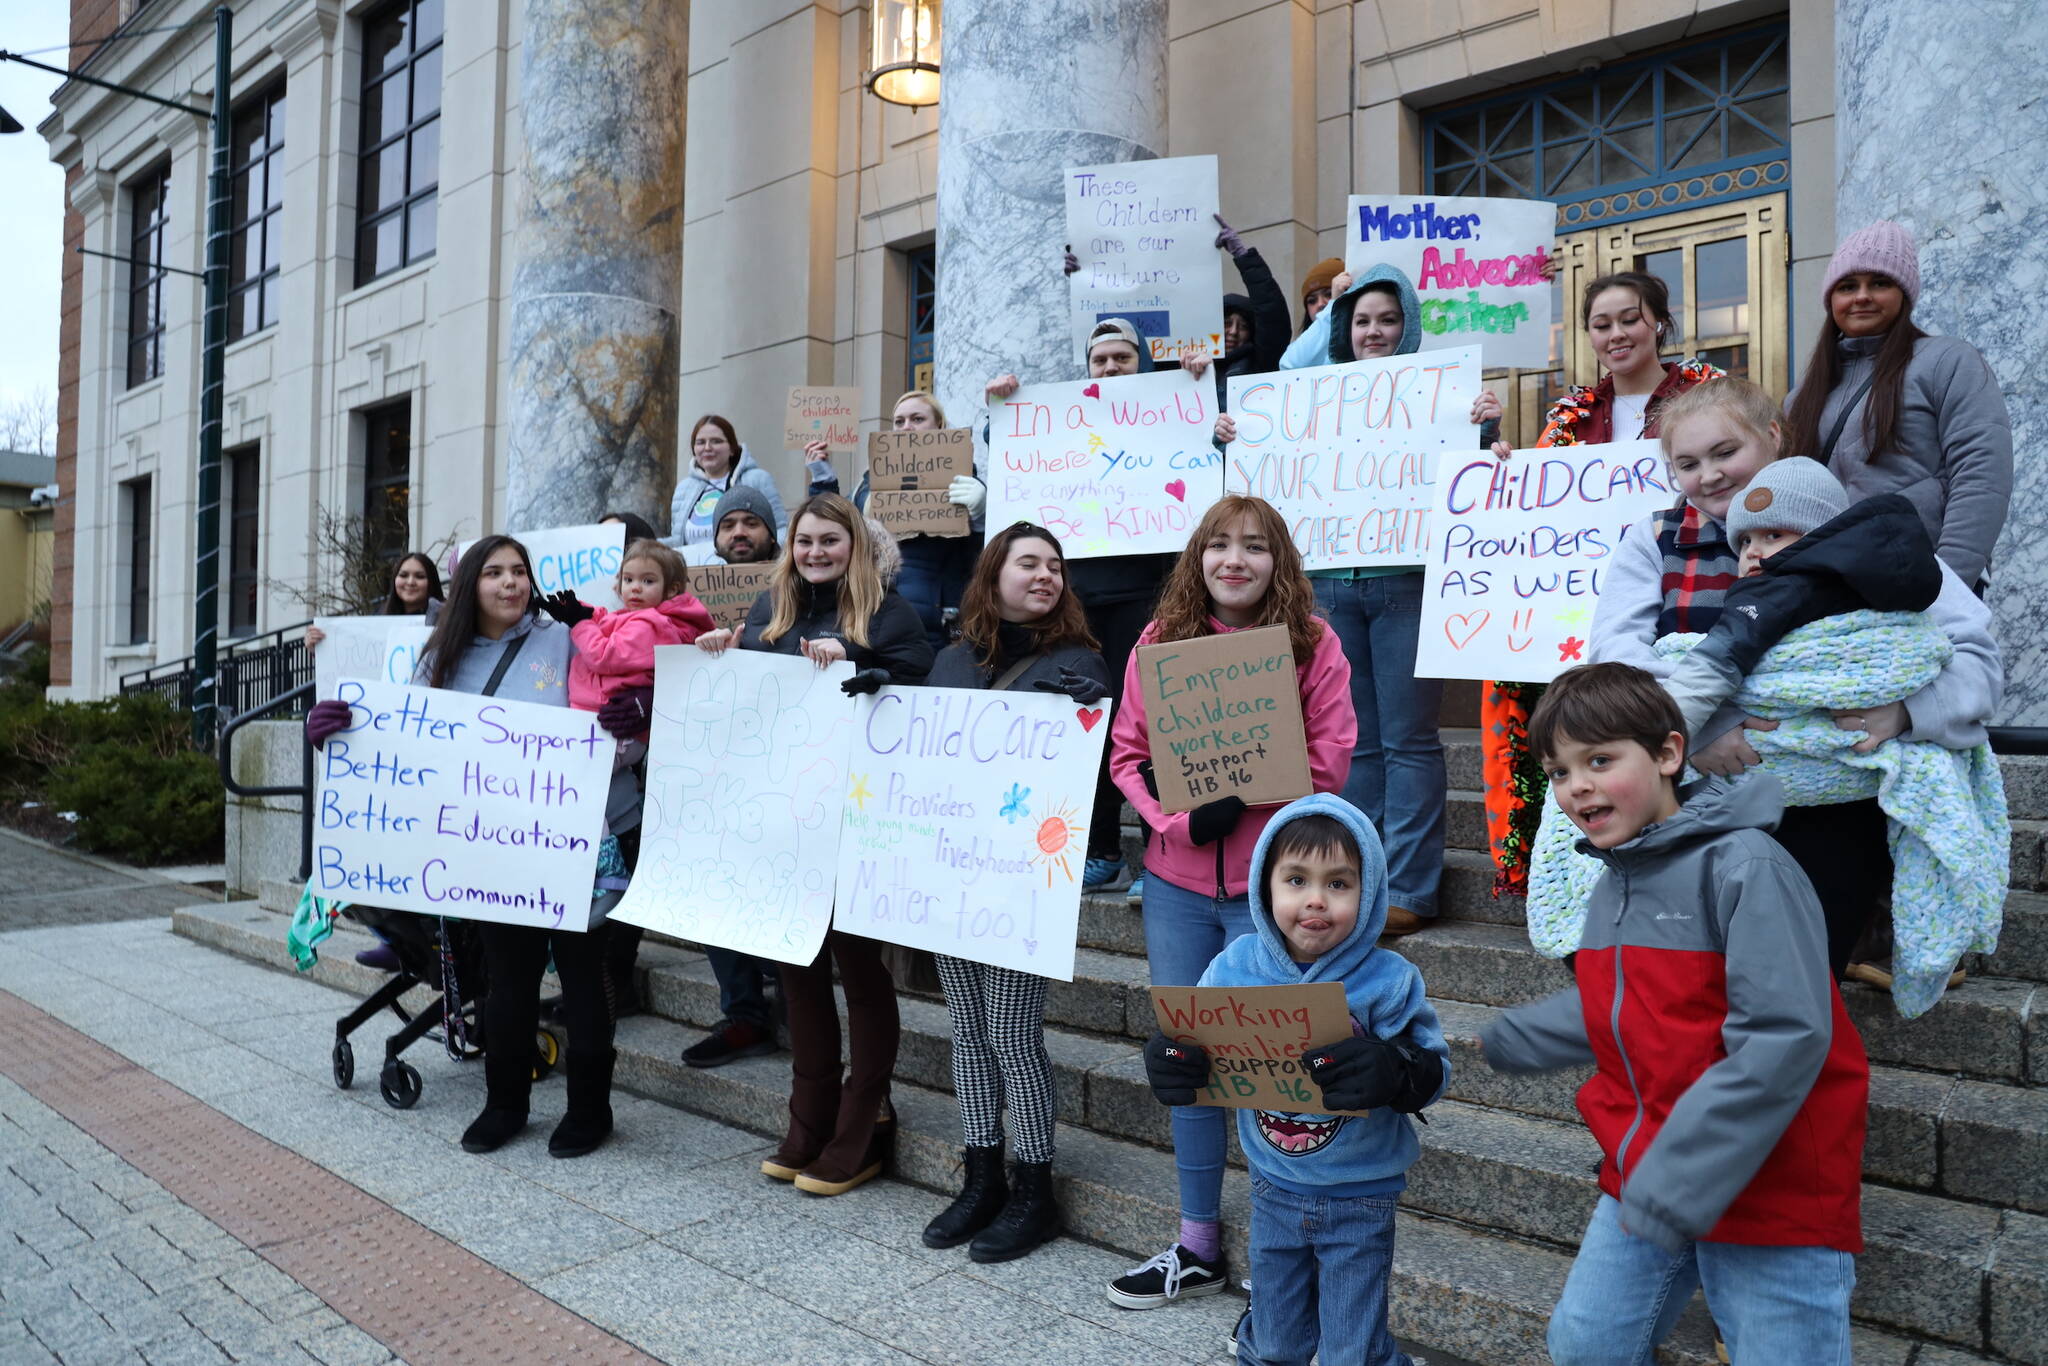 Supporters of a bill that would allow child care providers to participate in collective bargaining with the state’s Department of Health and establish a state fund to provide grants to childcare providers stand outside the Alaska State Capitol early Friday evening. (Clarise Larson / Juneau Empire)